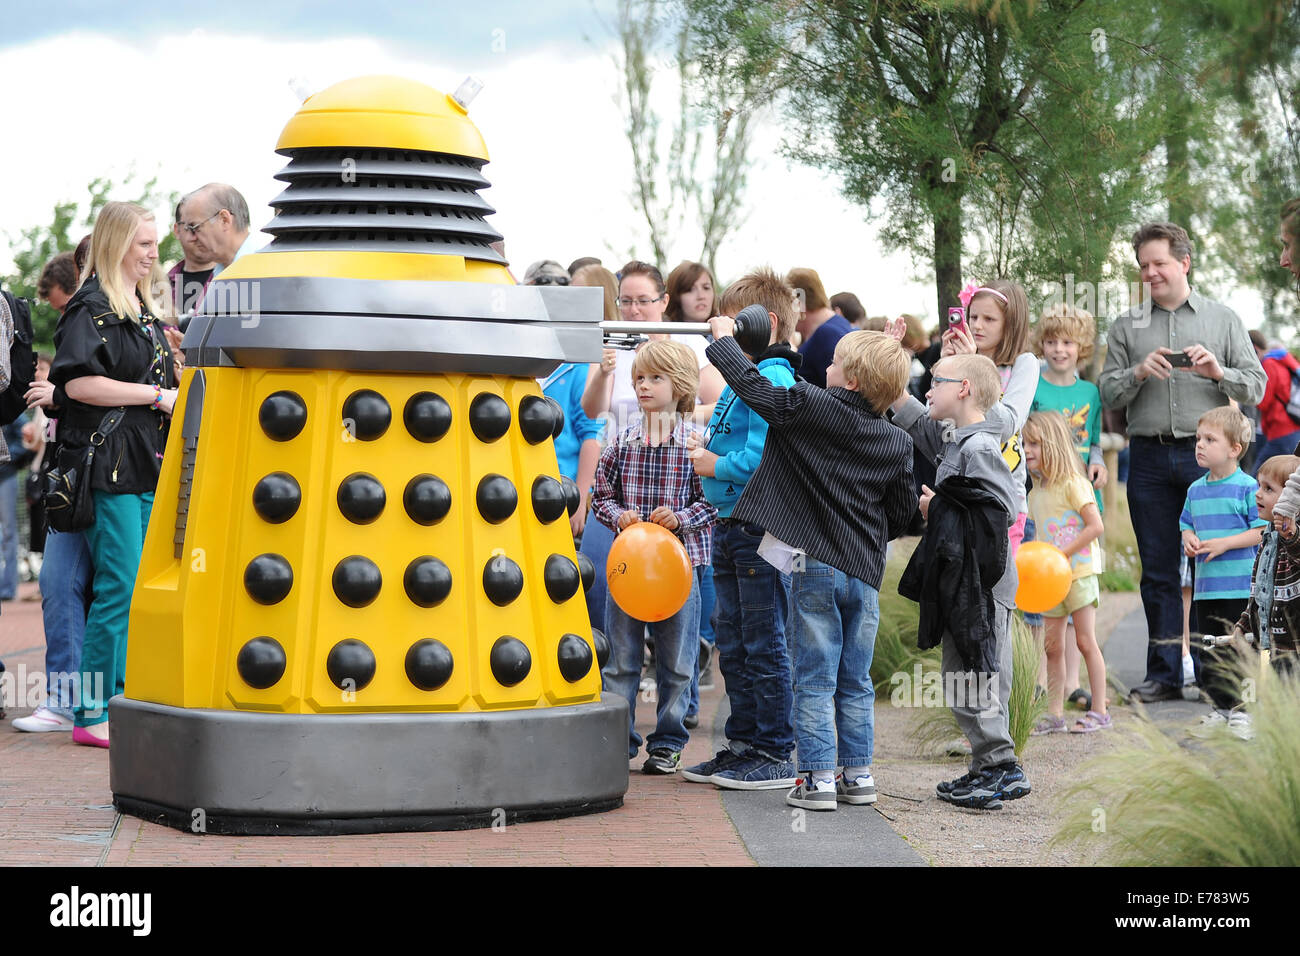 Doctor Who Fans in der Doctor Who Experience in Cardiff Bay, South Wales. Stockfoto